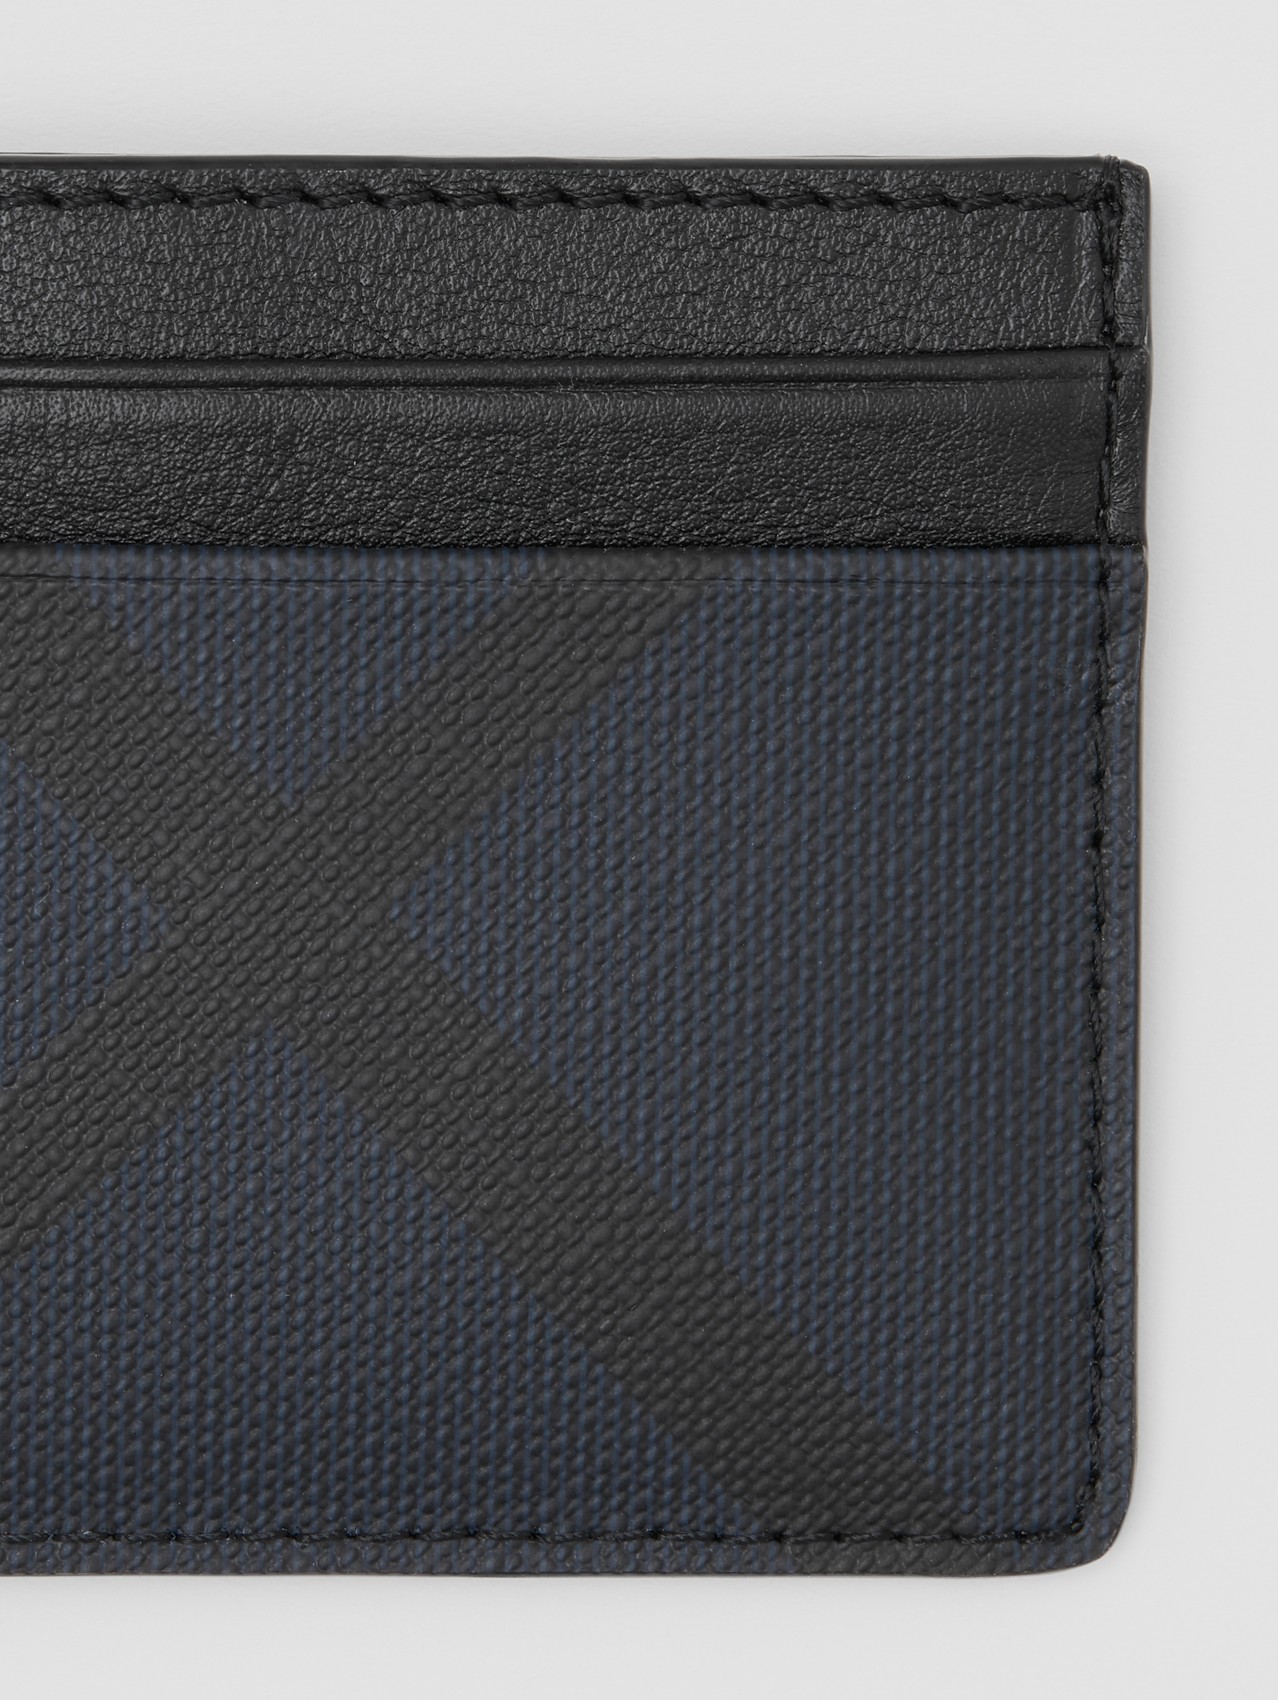 London Check and Leather Card Case in Navy